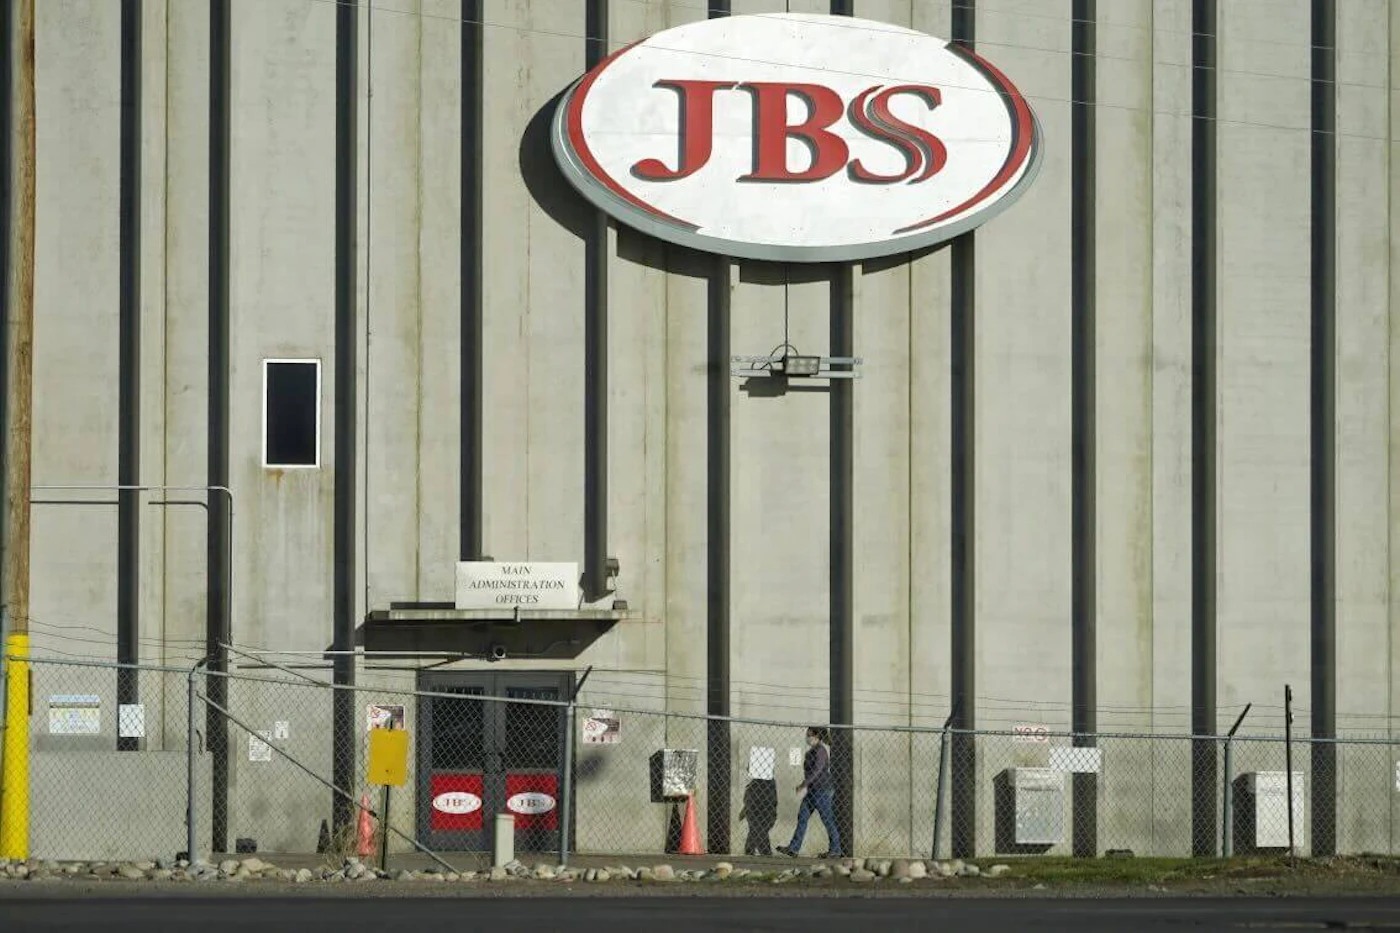 FILE - A worker heads into the JBS meatpacking plant in Greeley, Colo., Oct. 12, 2020. Kids ages 14 and 15 would no longer need a work permit or parental permission to get a job under a bill Wisconsin Republicans released on Friday, Aug. 18, 2023. (AP Photo/David Zalubowski, File)